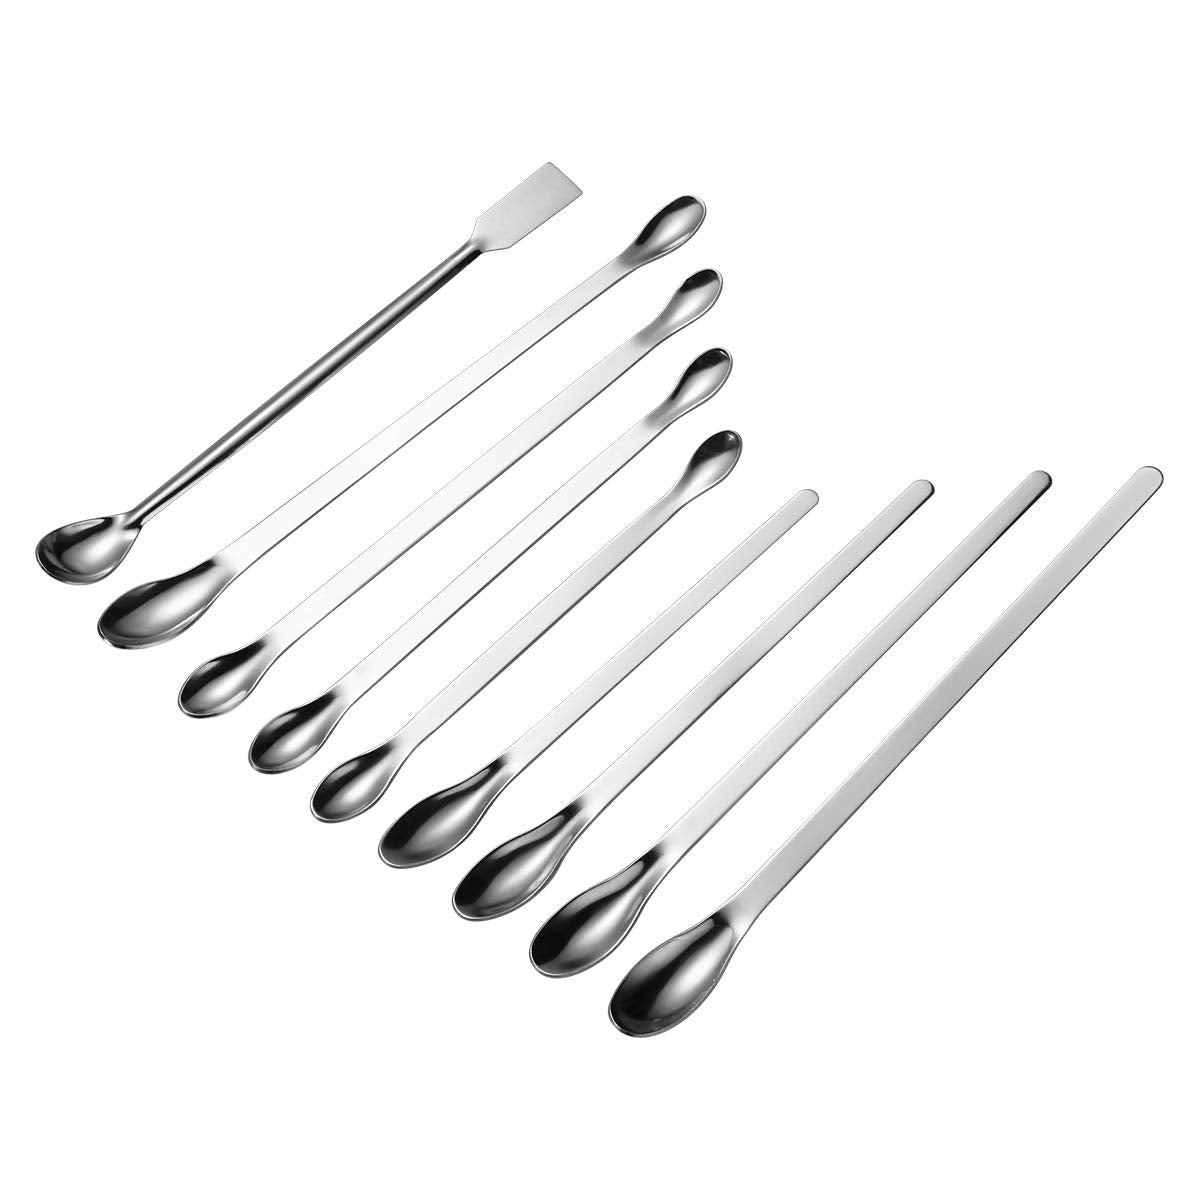 Lab Spatula,9 in 1 Stainless Steel Sampling Spoons Laboratory Scoops - Lab Mixing Spatulas,Length 16/18/20/22CM - e4cents